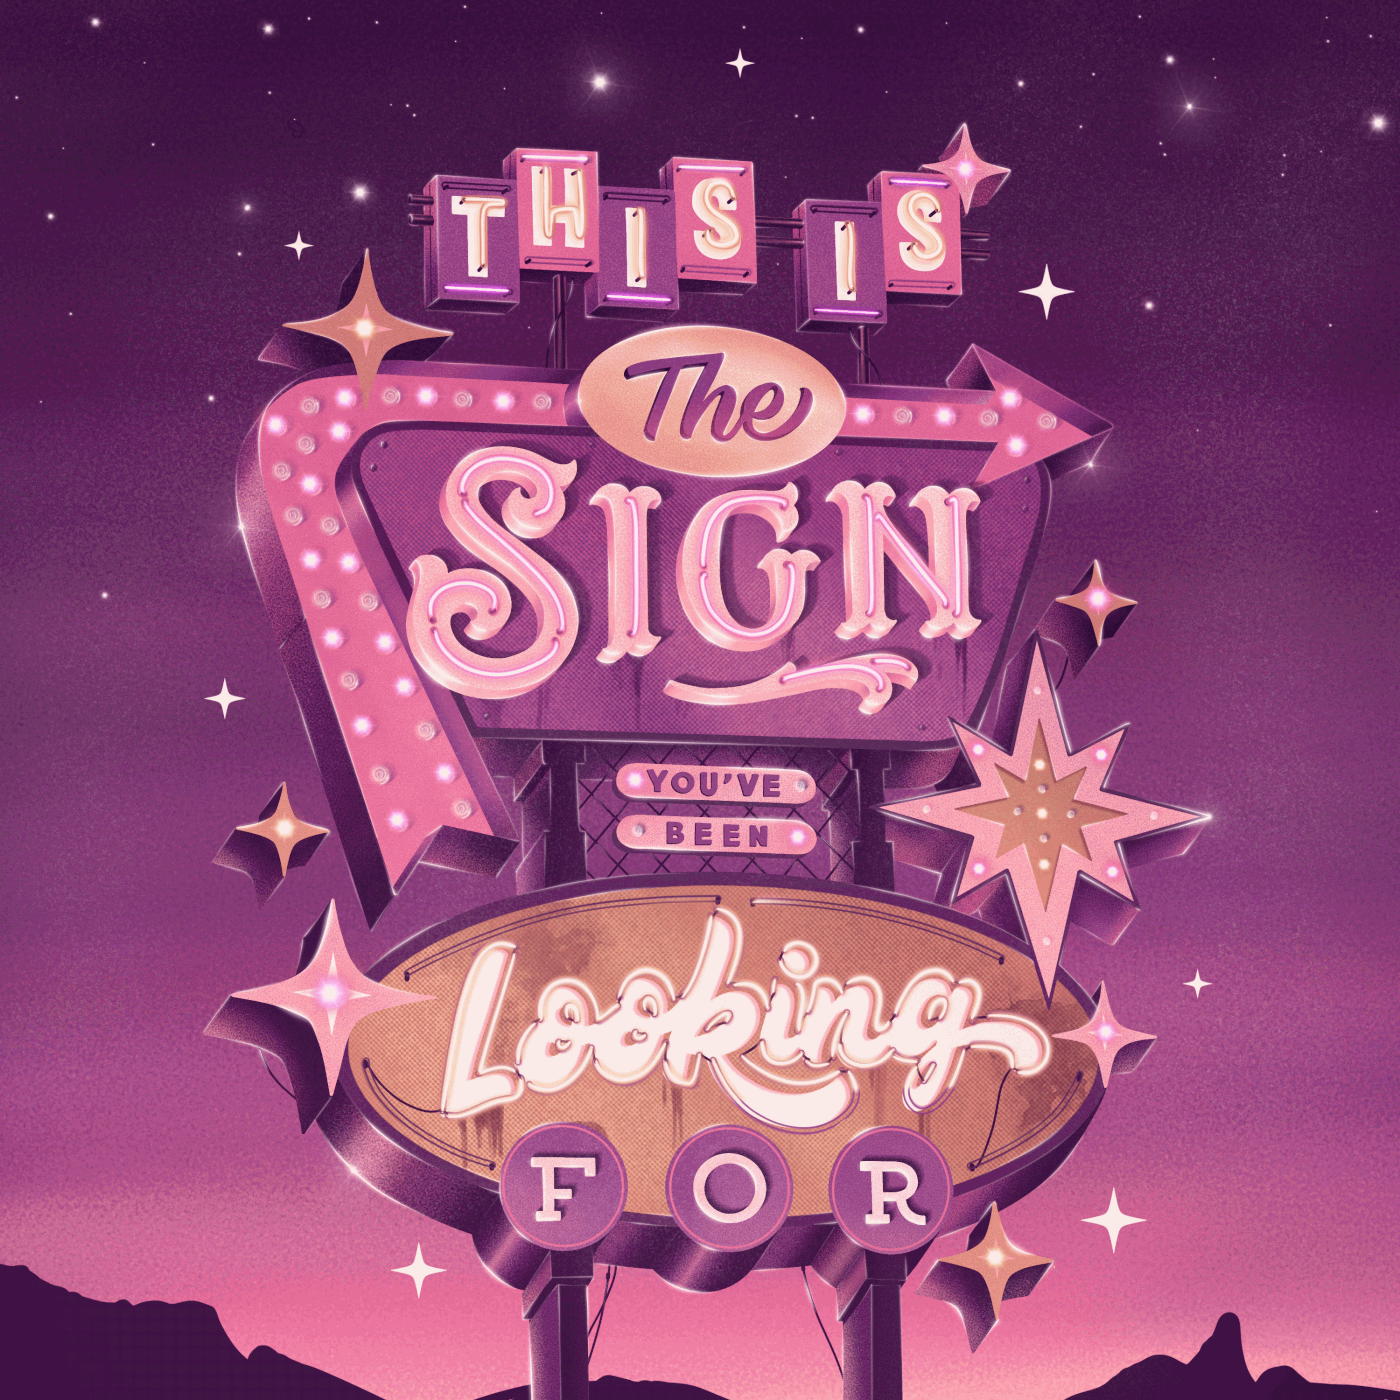 "This is the sign you've been looking for" Retro Sign lettering in Procreate